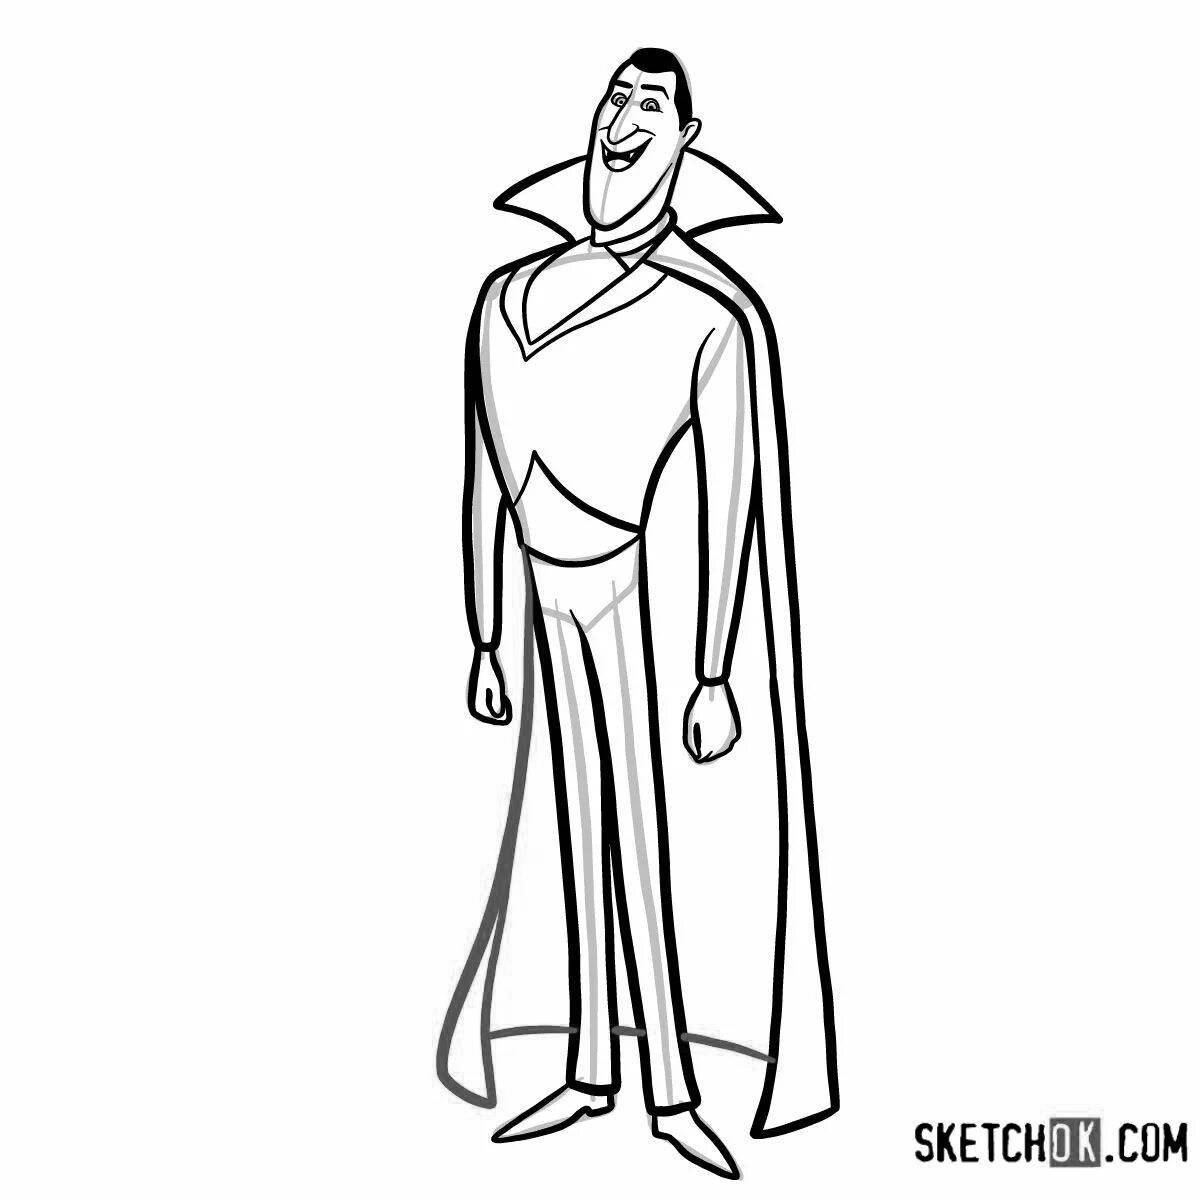 Coloring book sinful Count Dracula